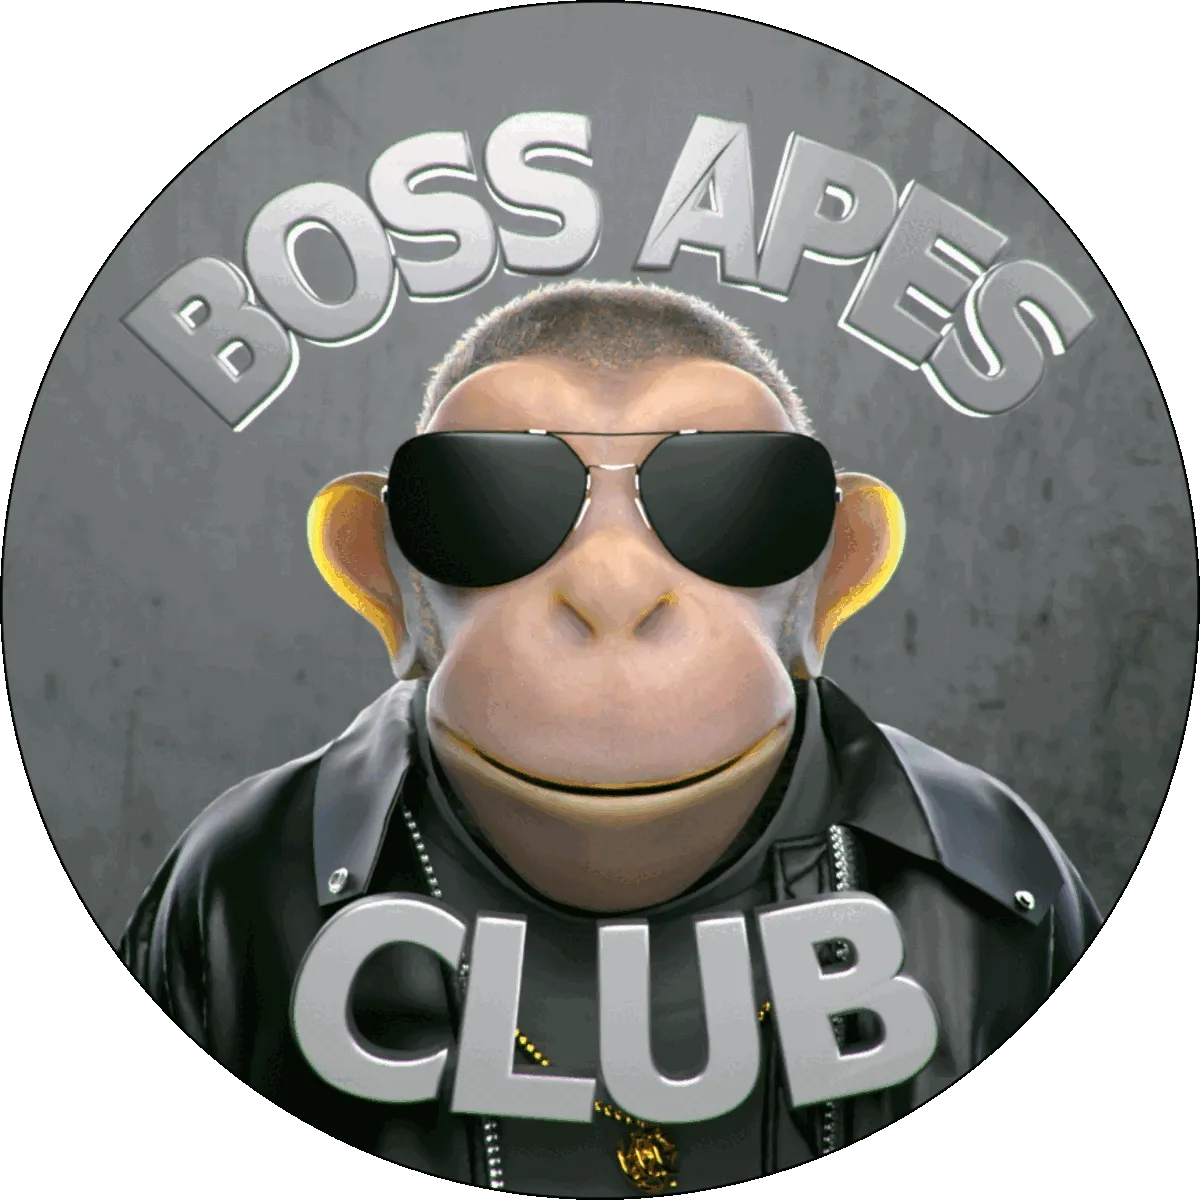 [OFFICIAL] Boss Apes Club